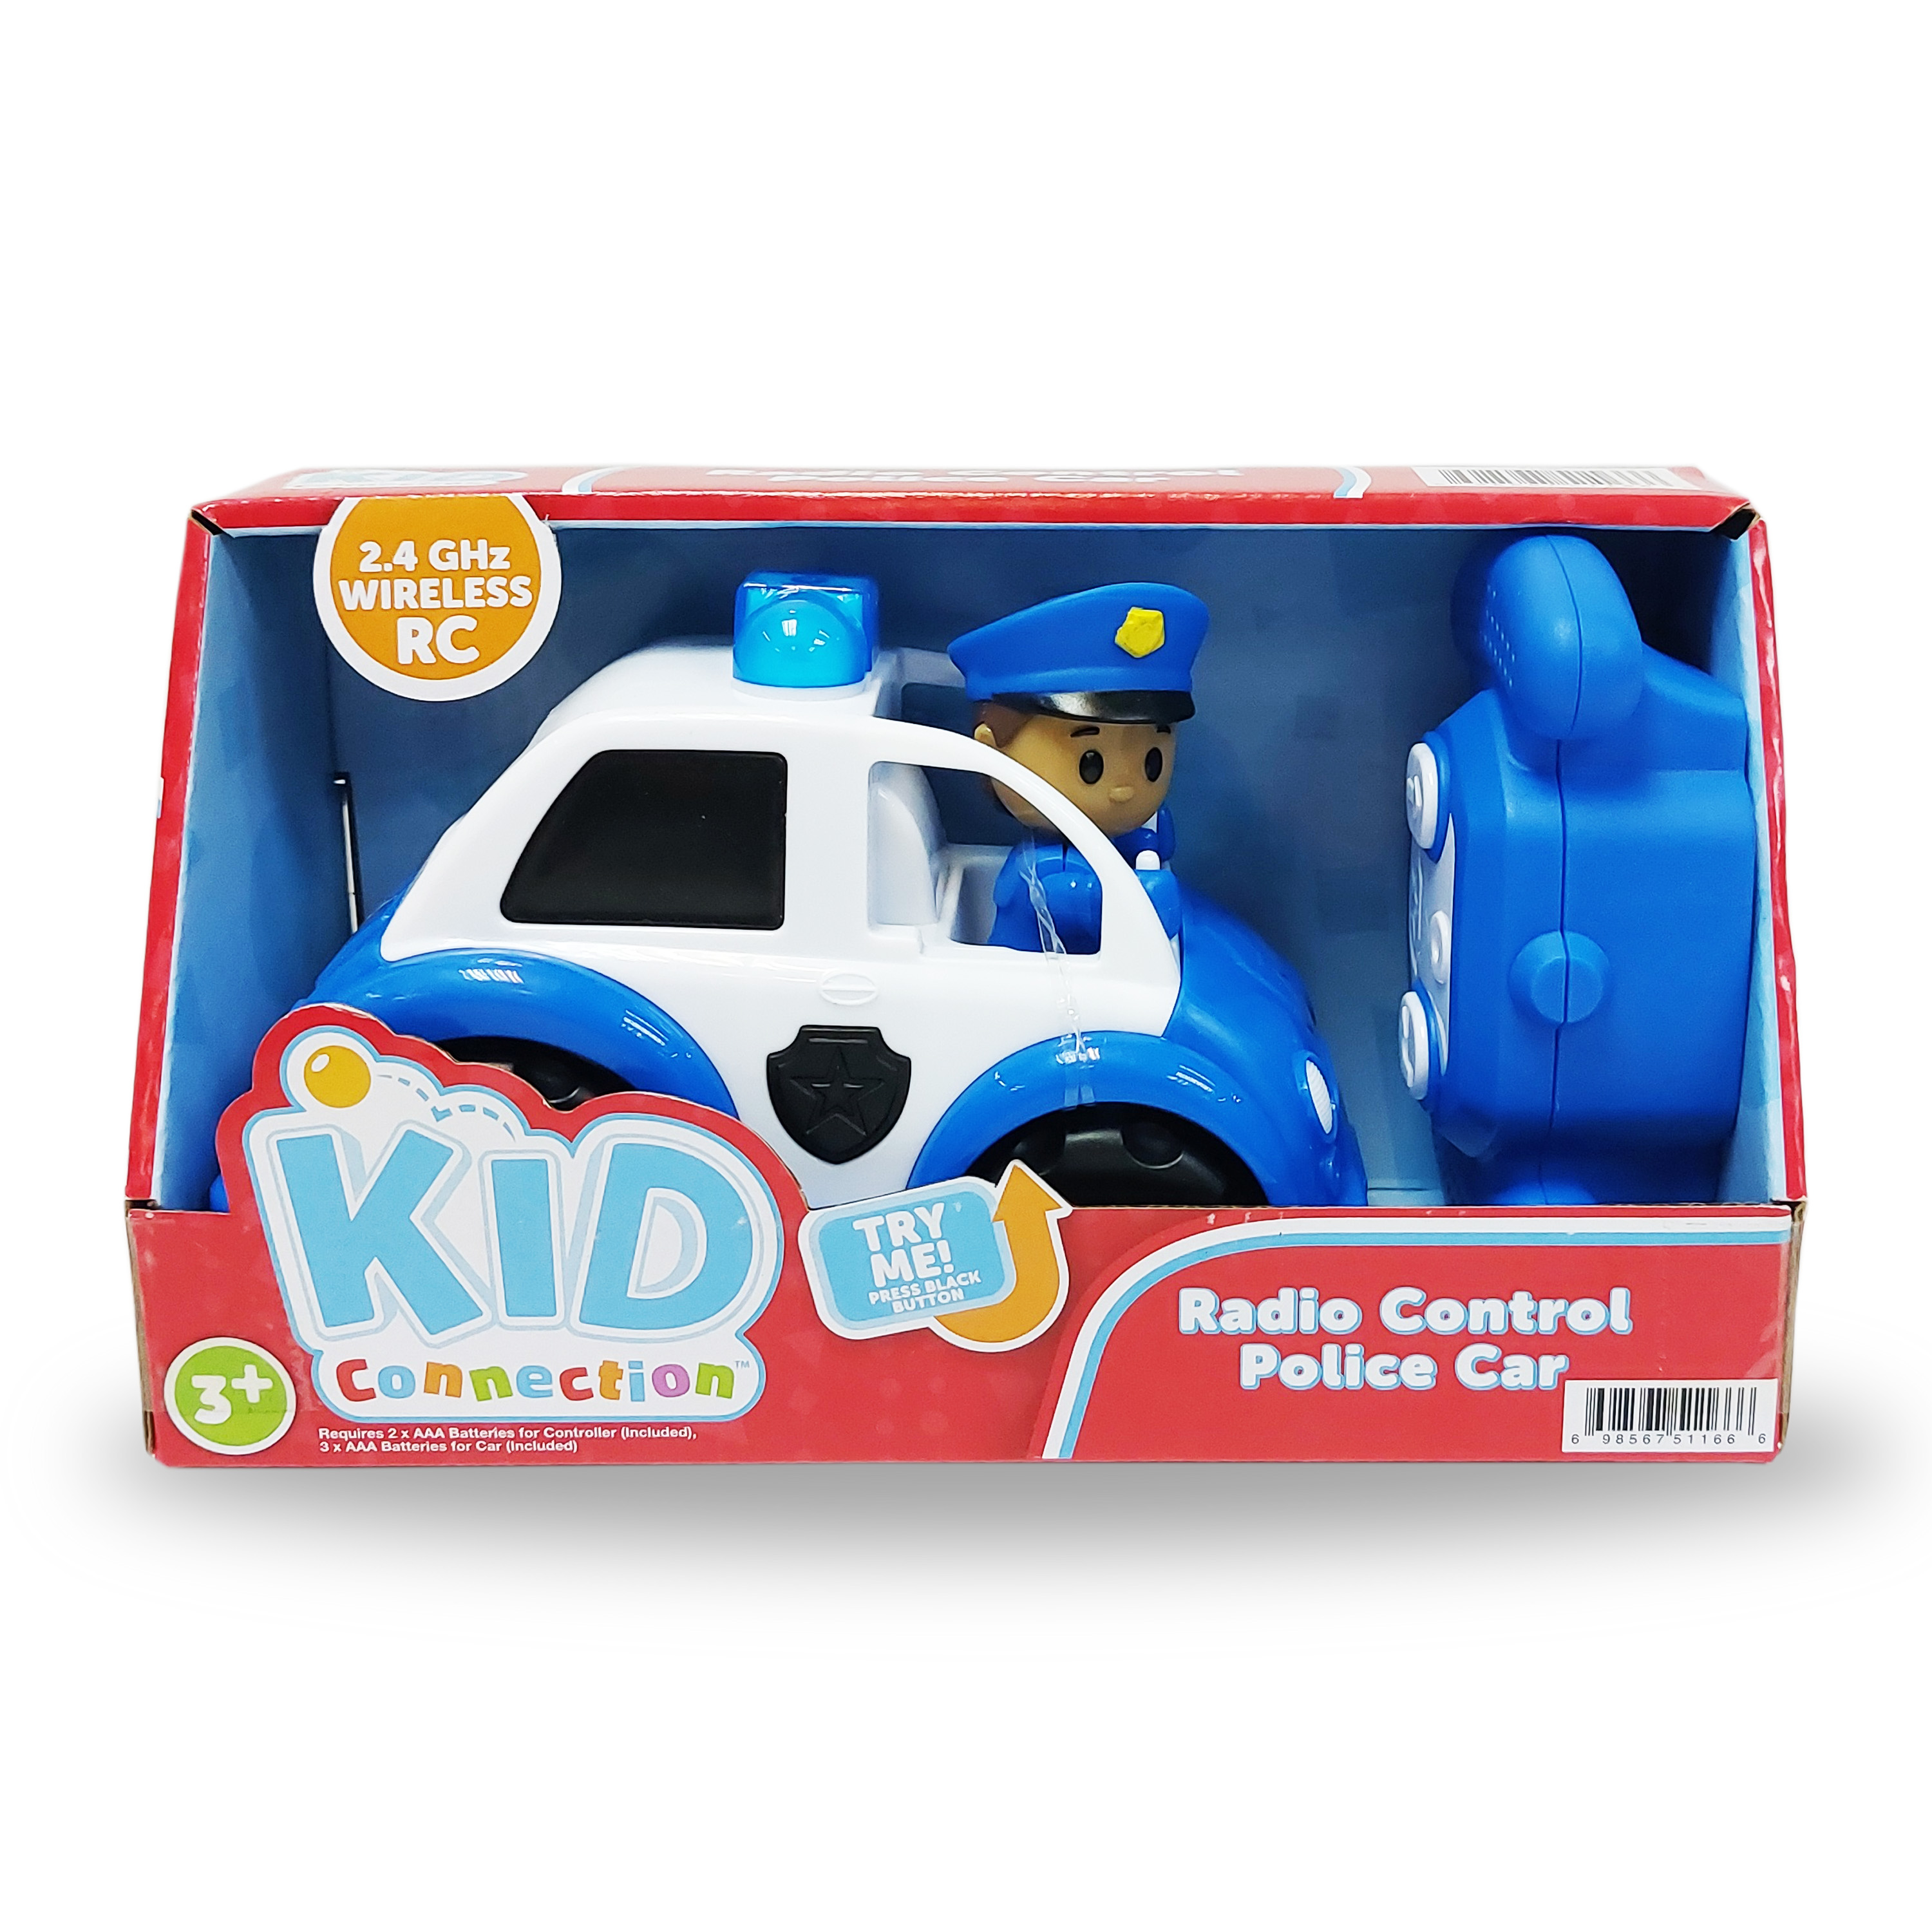 Kid Connection RC Police Car with Lights and Police Officer Figure, 2.4G, Ages 3+ - image 1 of 6